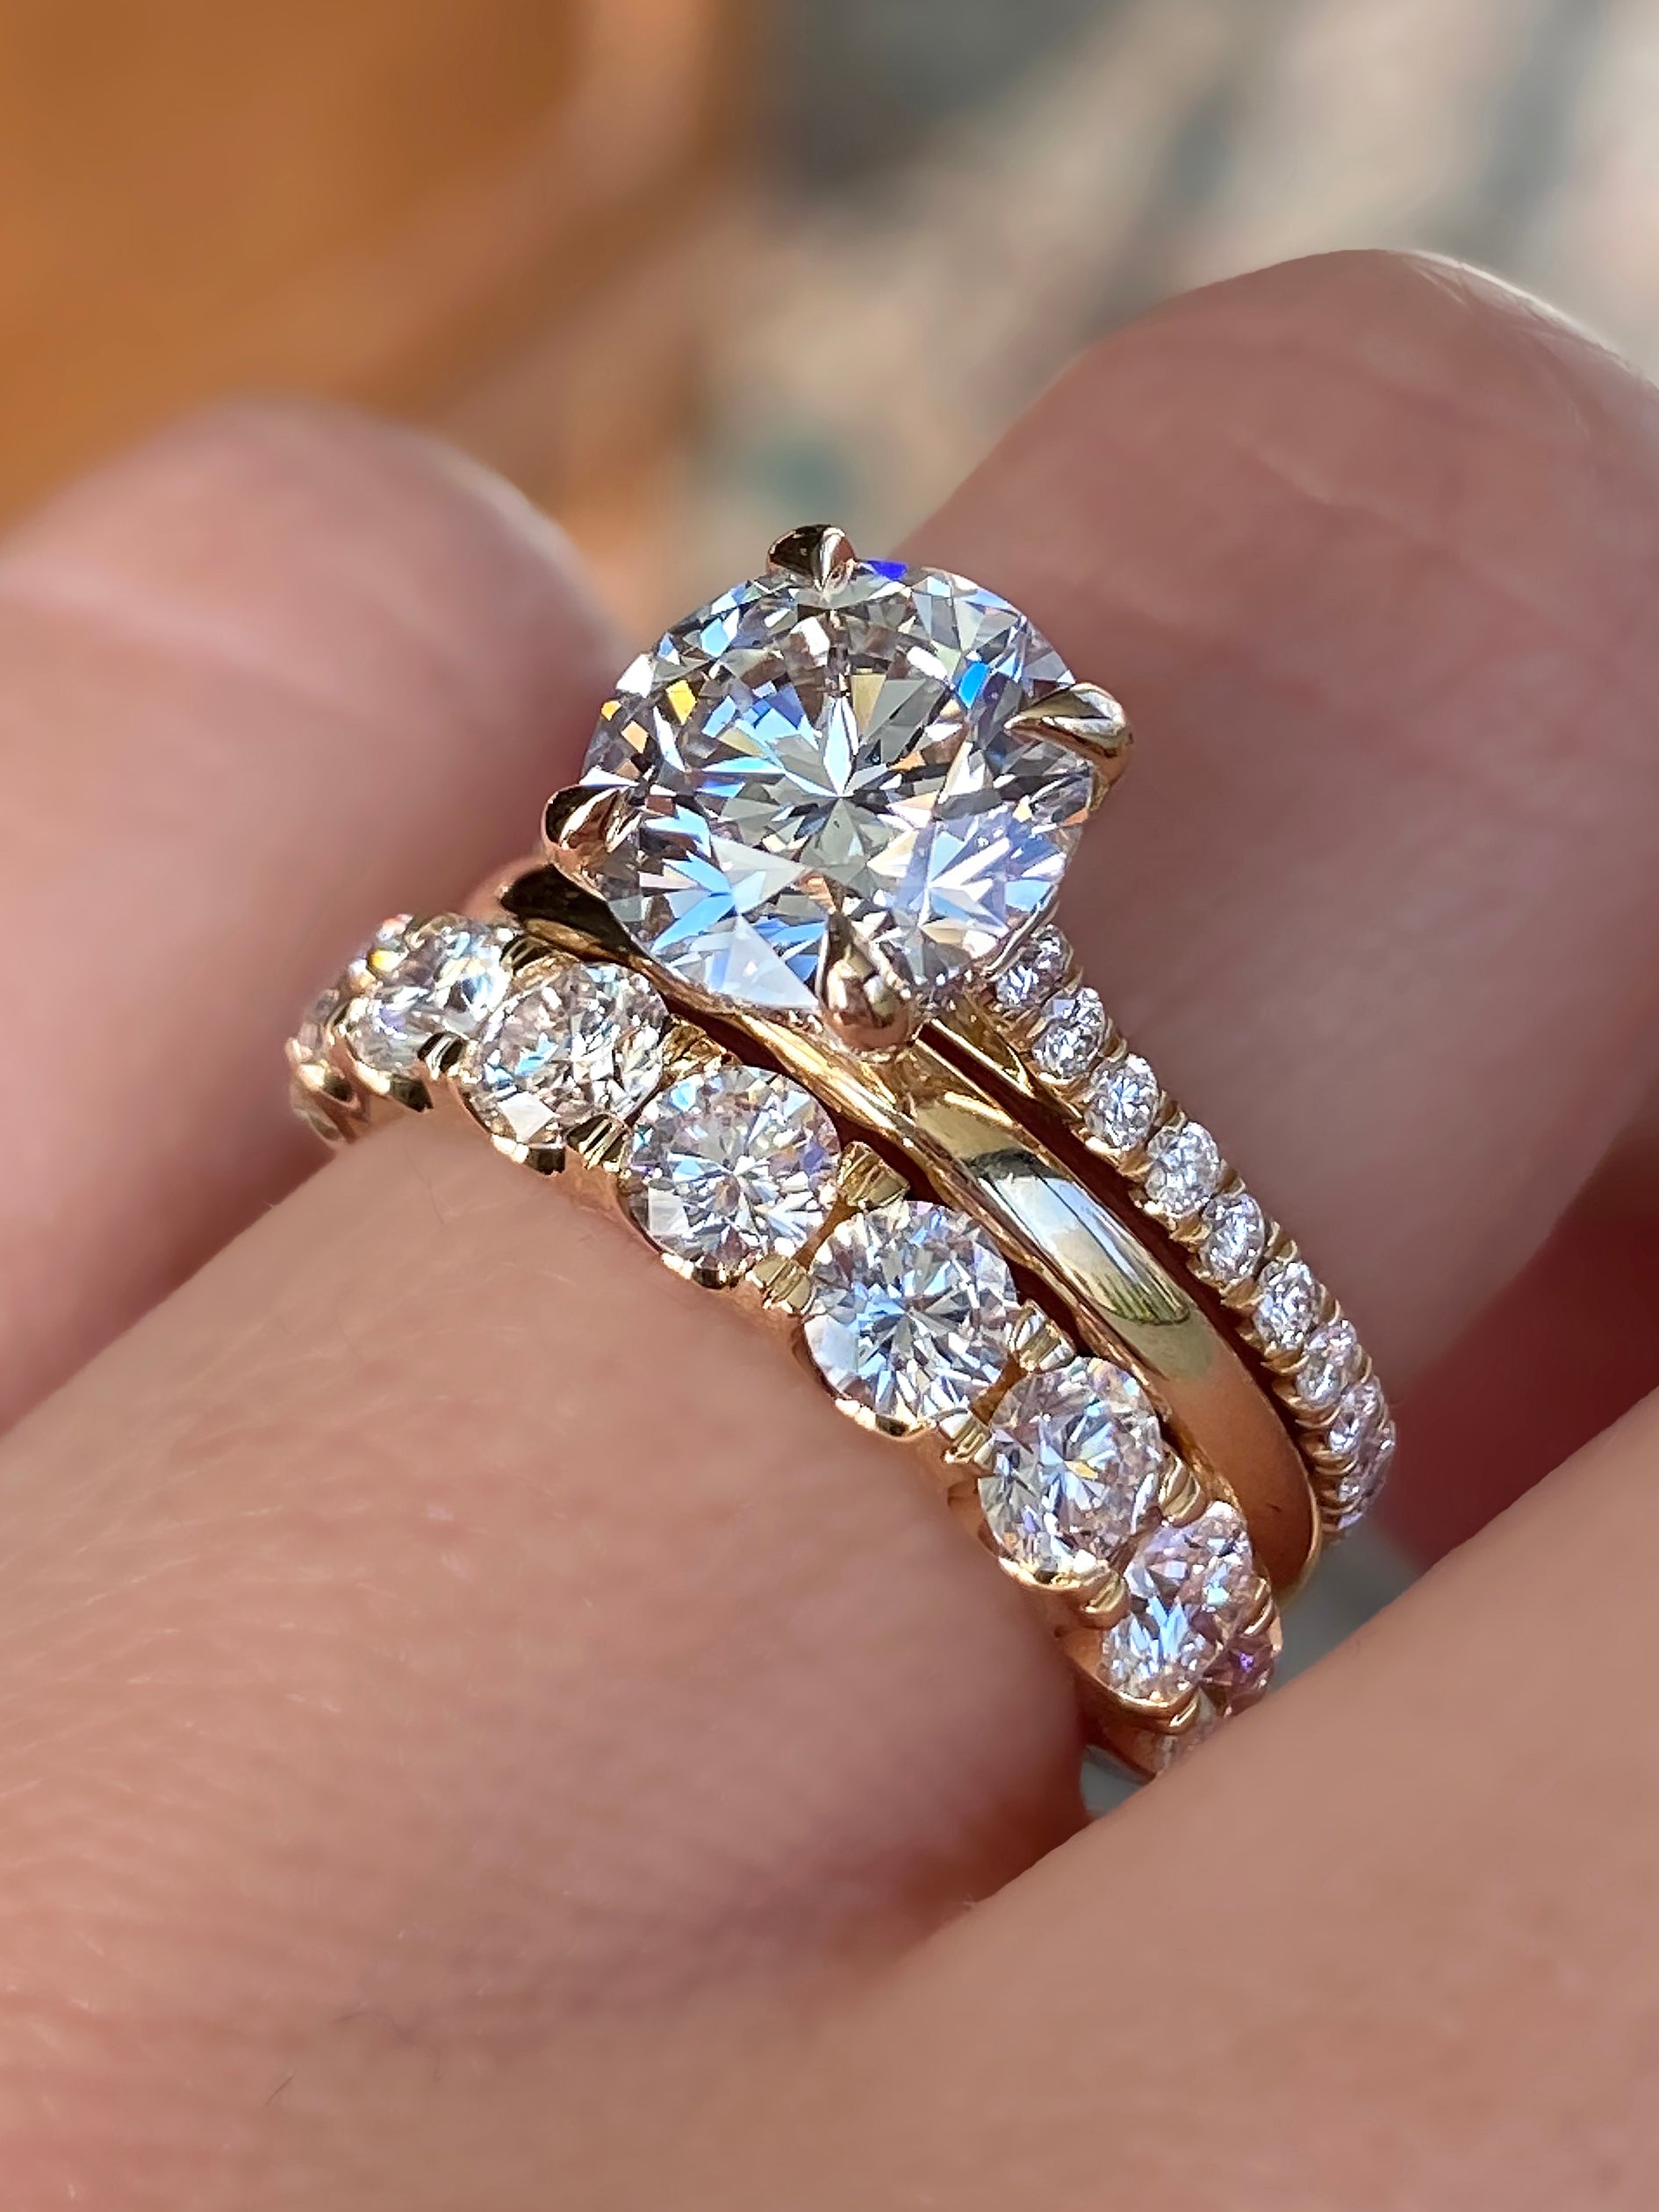 Best Place To Buy Engagement Rings Online